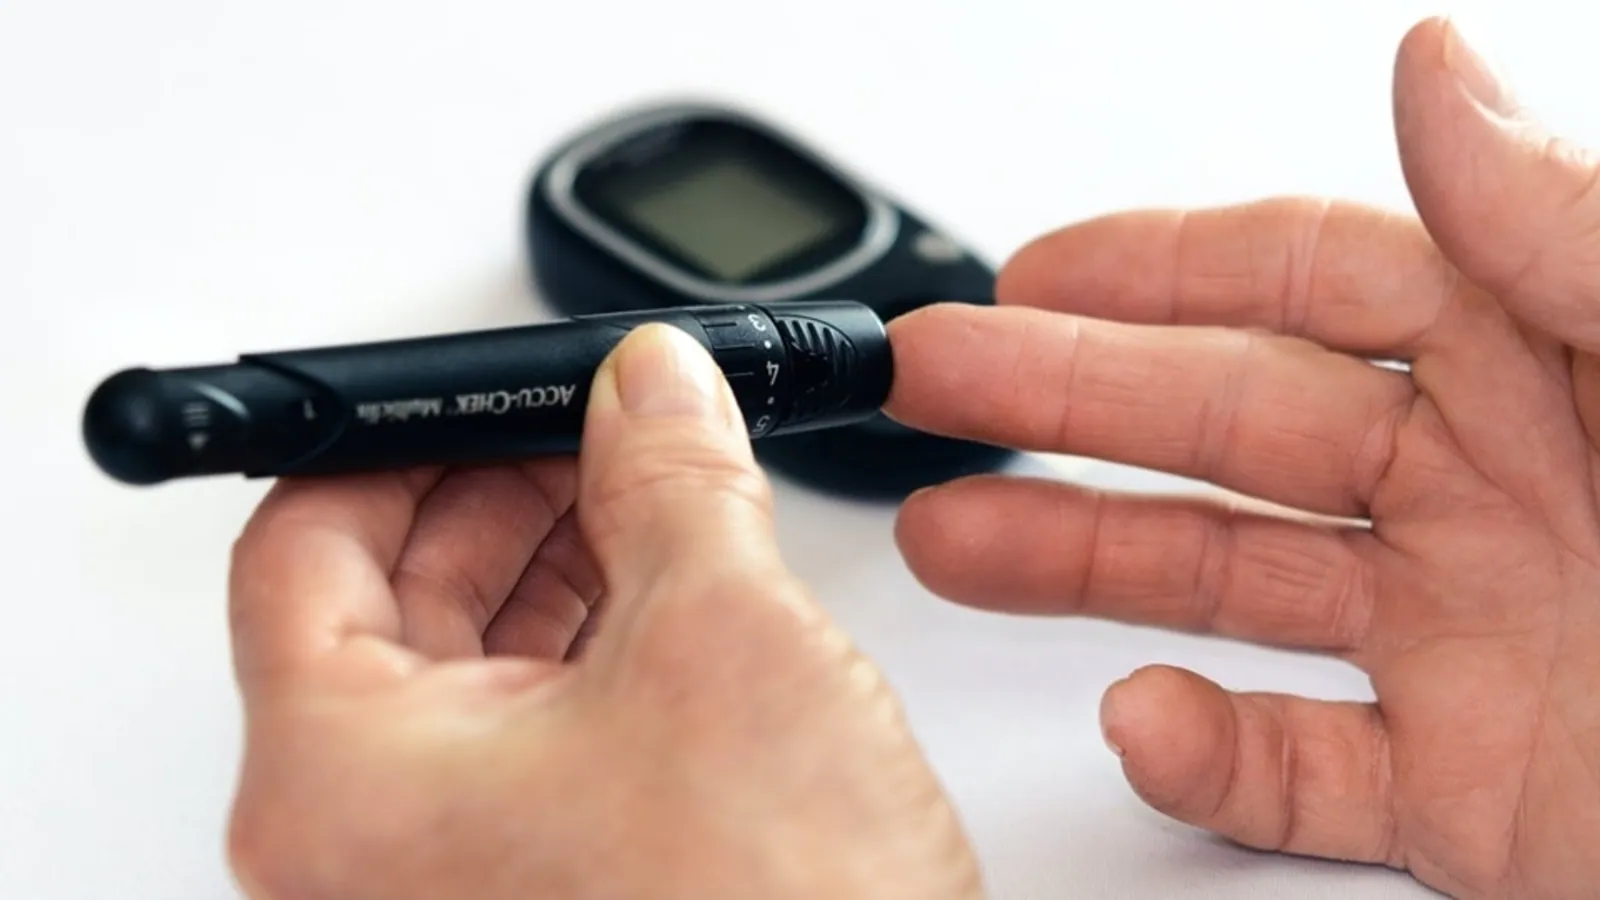 Research suggests long-term follow-up reduces type 2 diabetes risk